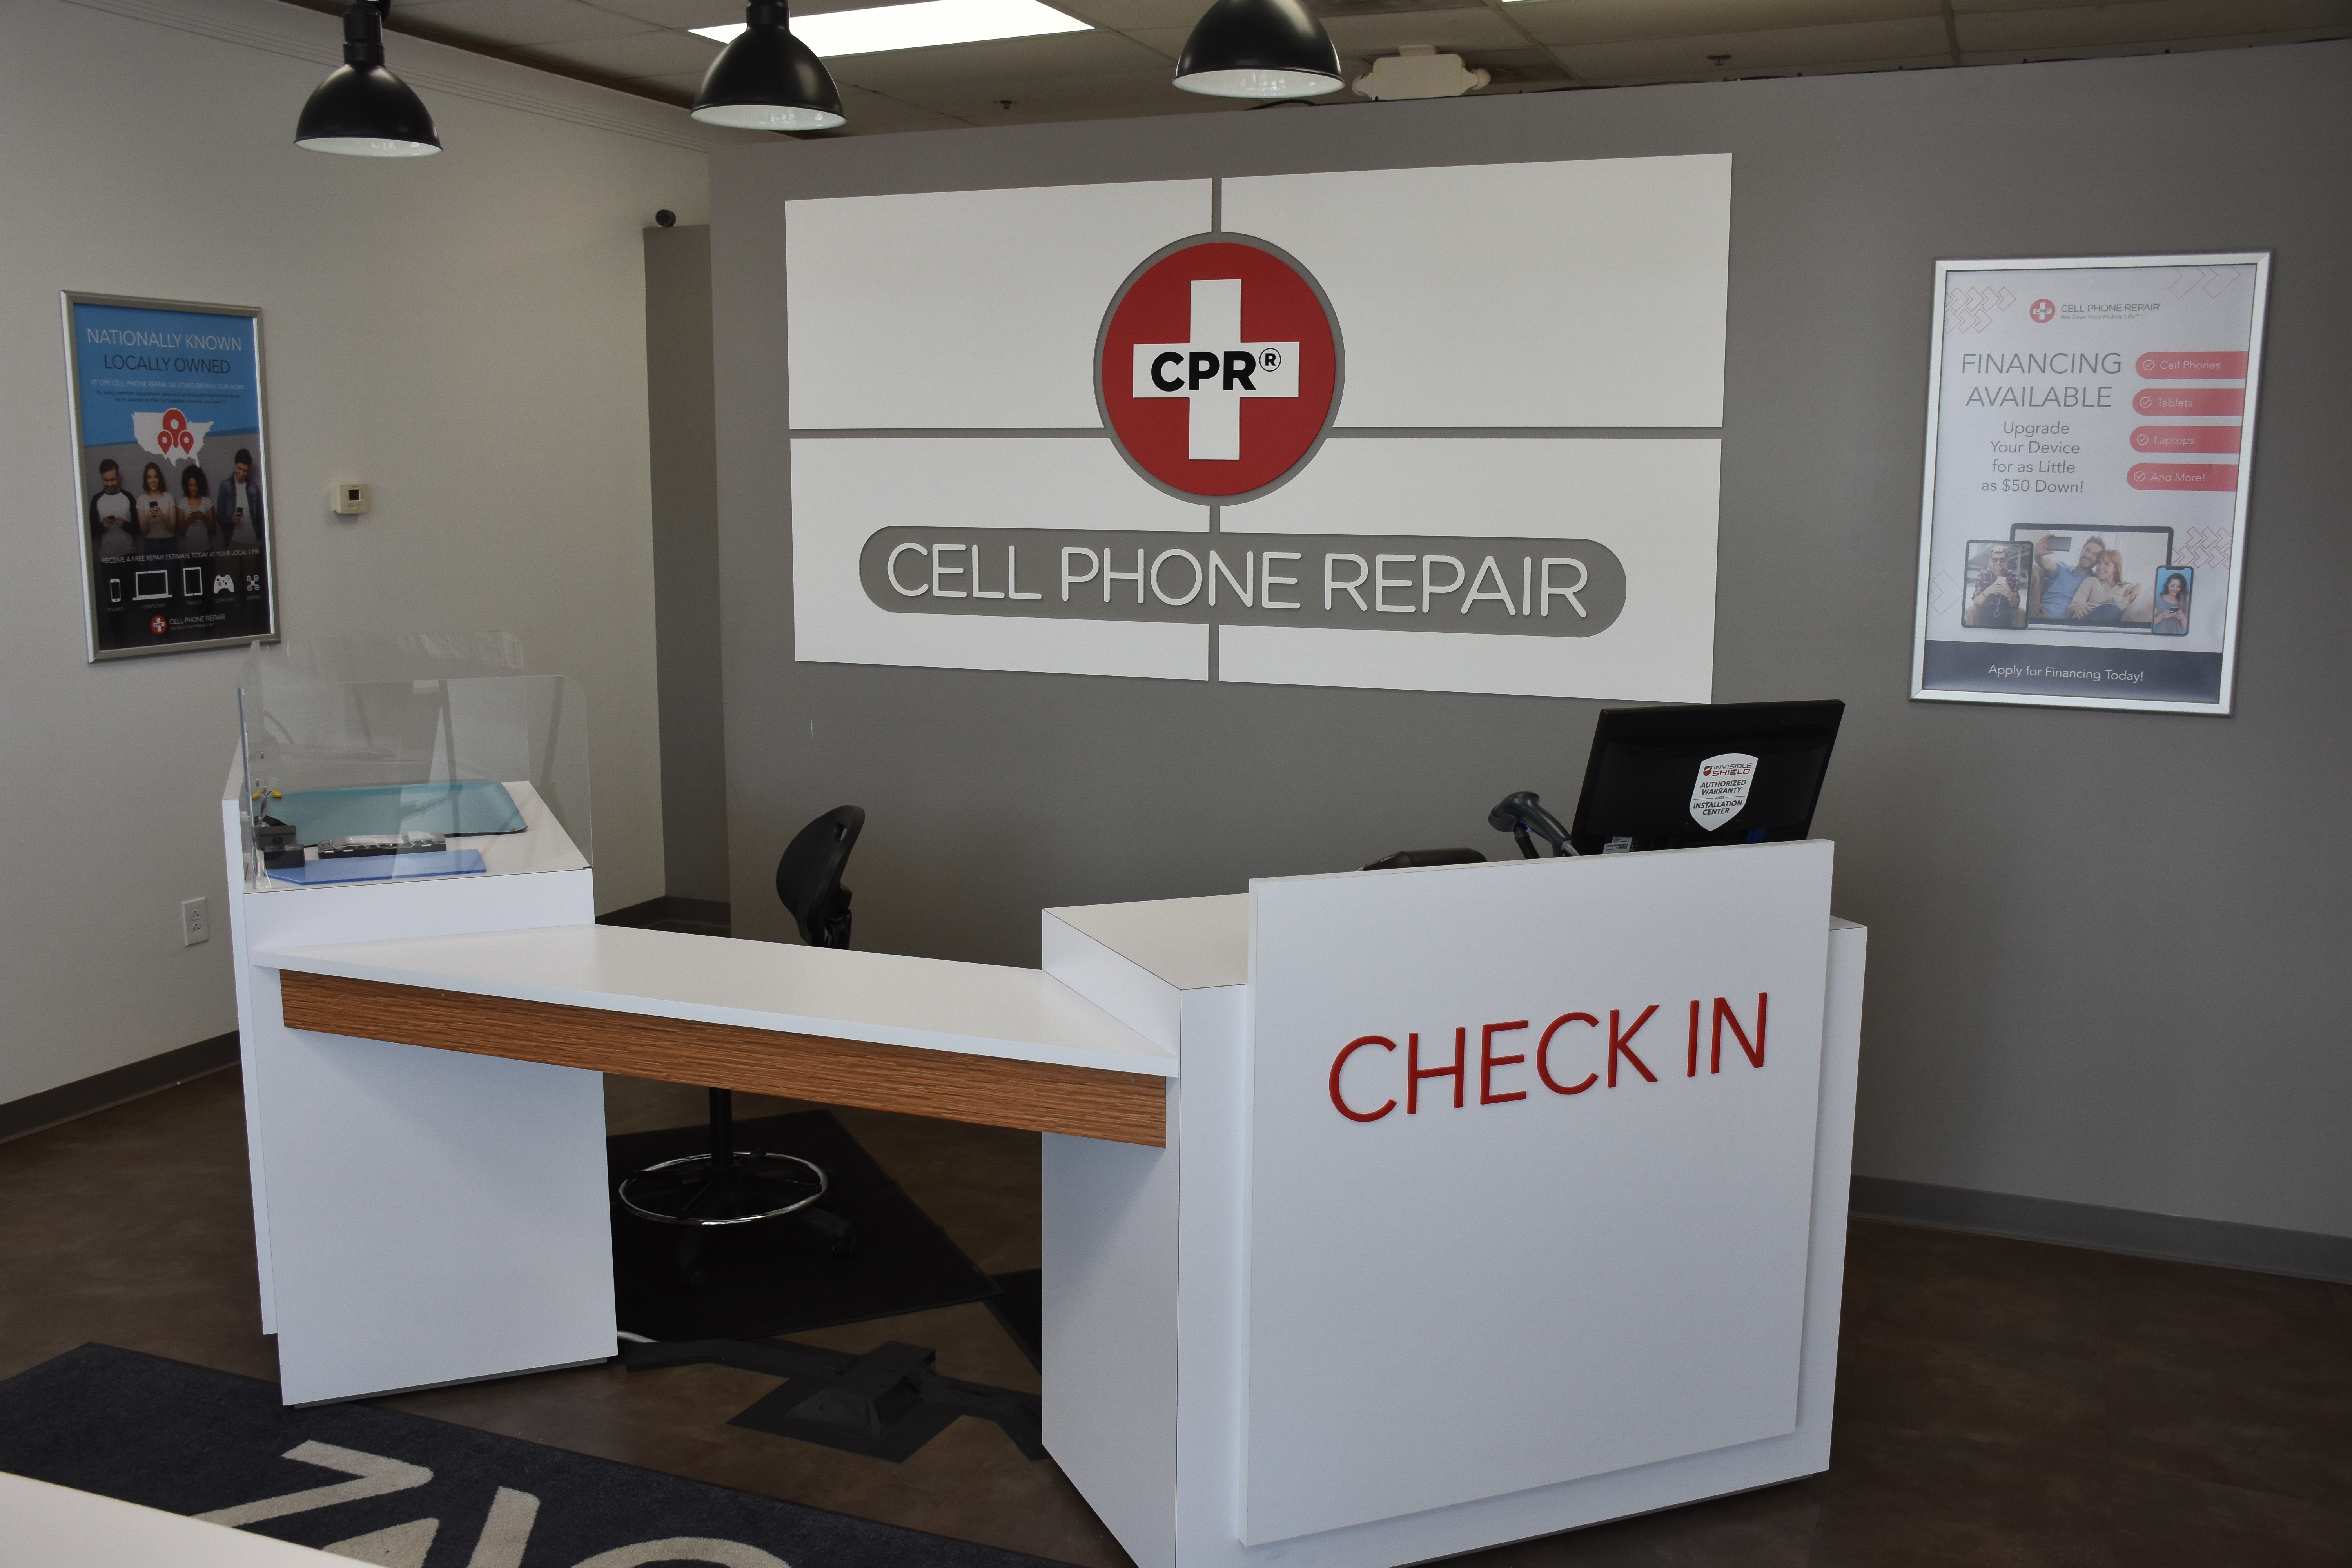 CPR Cell Phone Repair, Friday, July 2, 2021, Press release picture